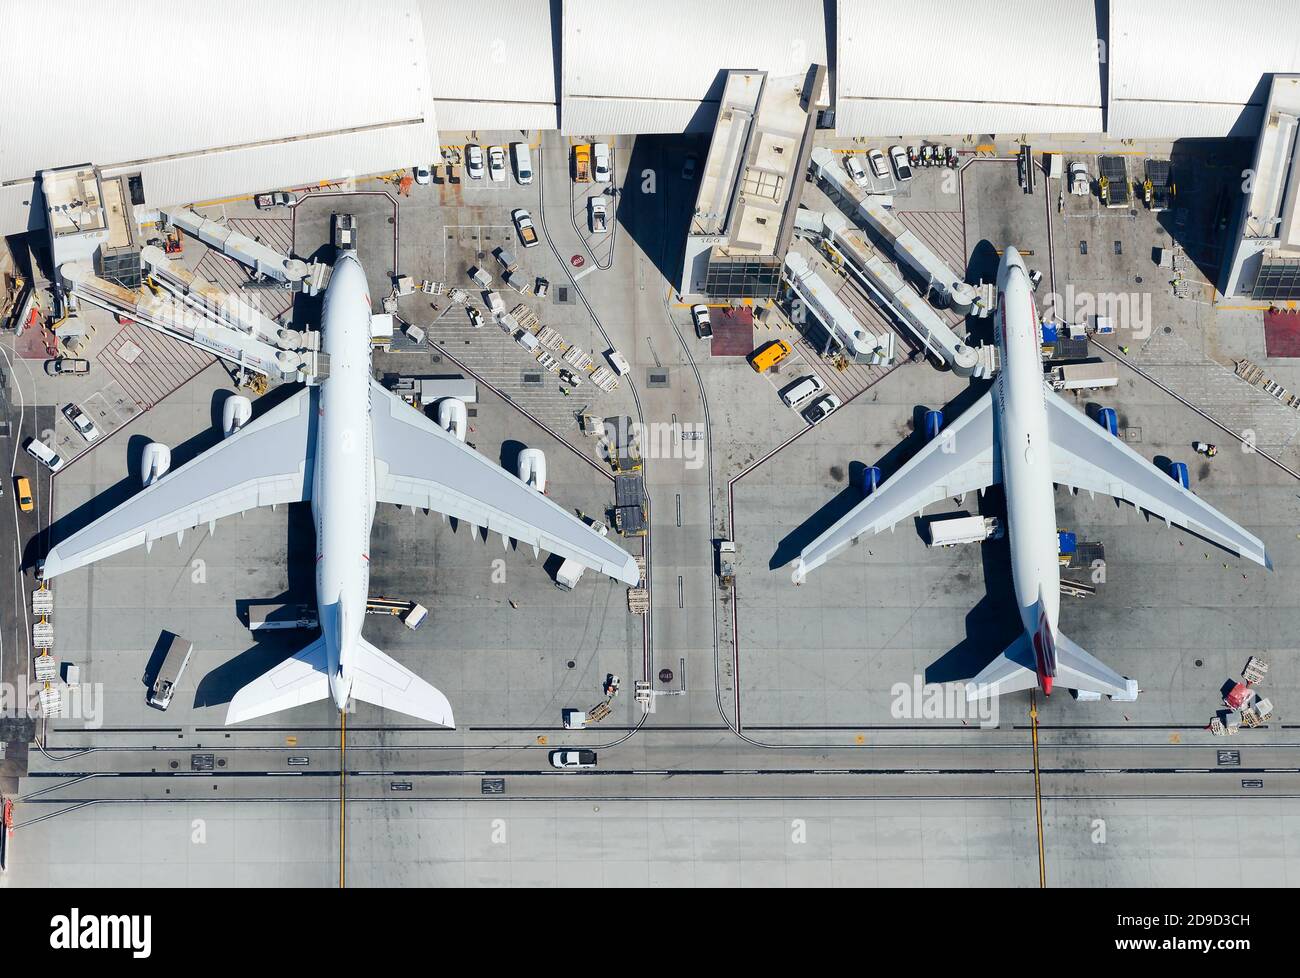 Aerial view of Tom Bradley International Terminal with two quadrijets airplanes side by side. TBIT Terminal at LAX Airport. Quadrijet aircraft. Stock Photo